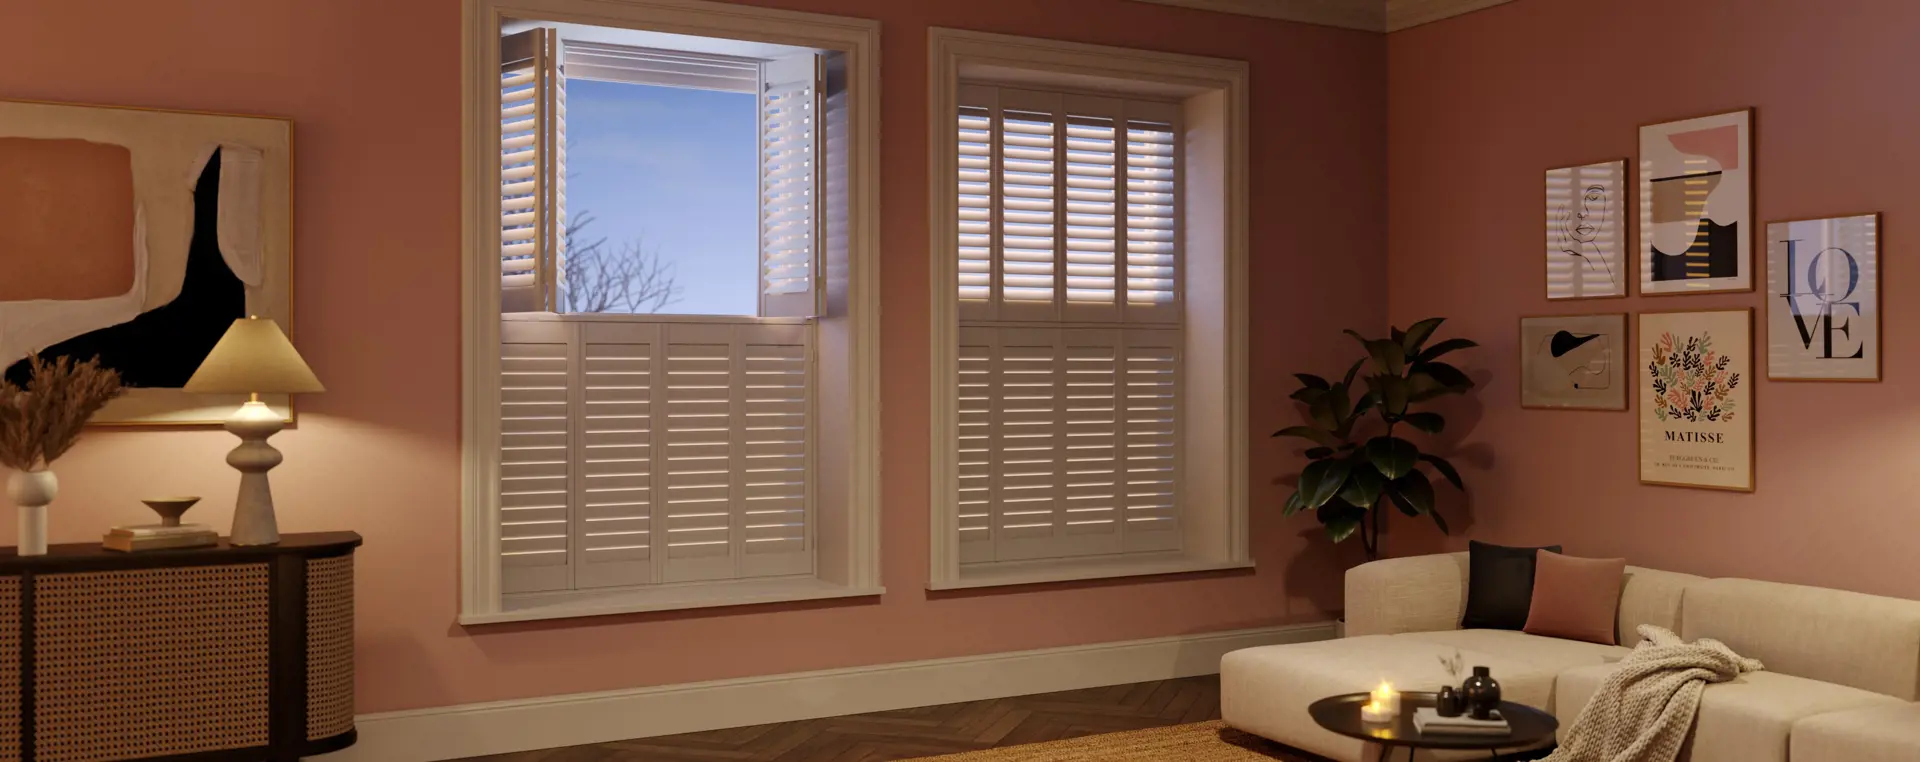 Access exclusive deals, coupons, offers and cashback on Transform Your Home with California Shutters through OODLZ courtesy of California Shutters.